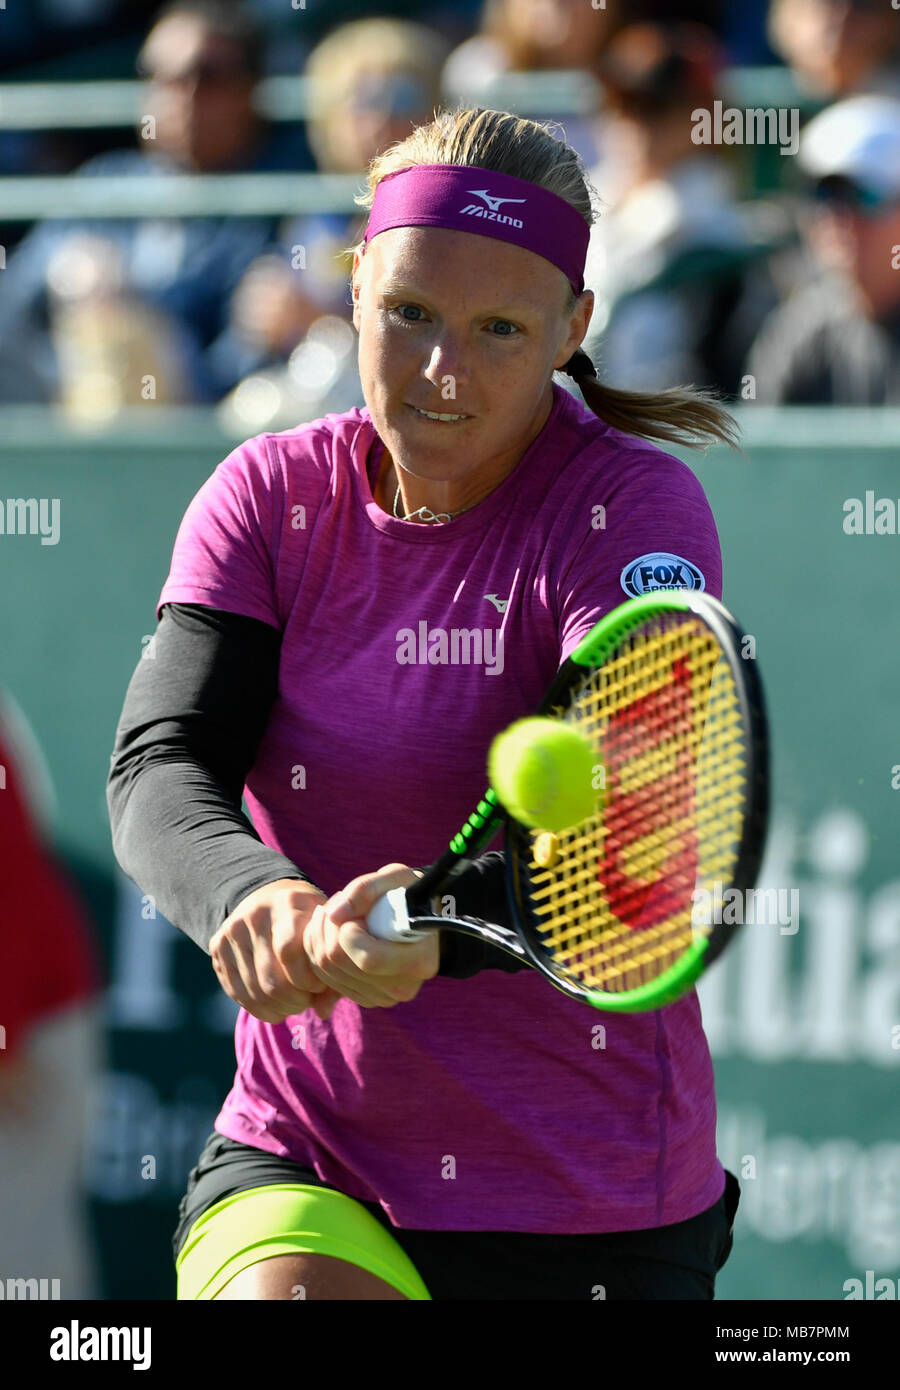 Charleston, South Carolina, USA. 8th Apr, 2018. Kiki Bertens (NED) defeated Julia Goerges (GER) 6-2, 6-1, at the Volvo Car Open being played at Family Circle Tennis Center in Charleston, South Carolina. © Leslie Billman/Tennisclix/CSM/Alamy Live News Stock Photo